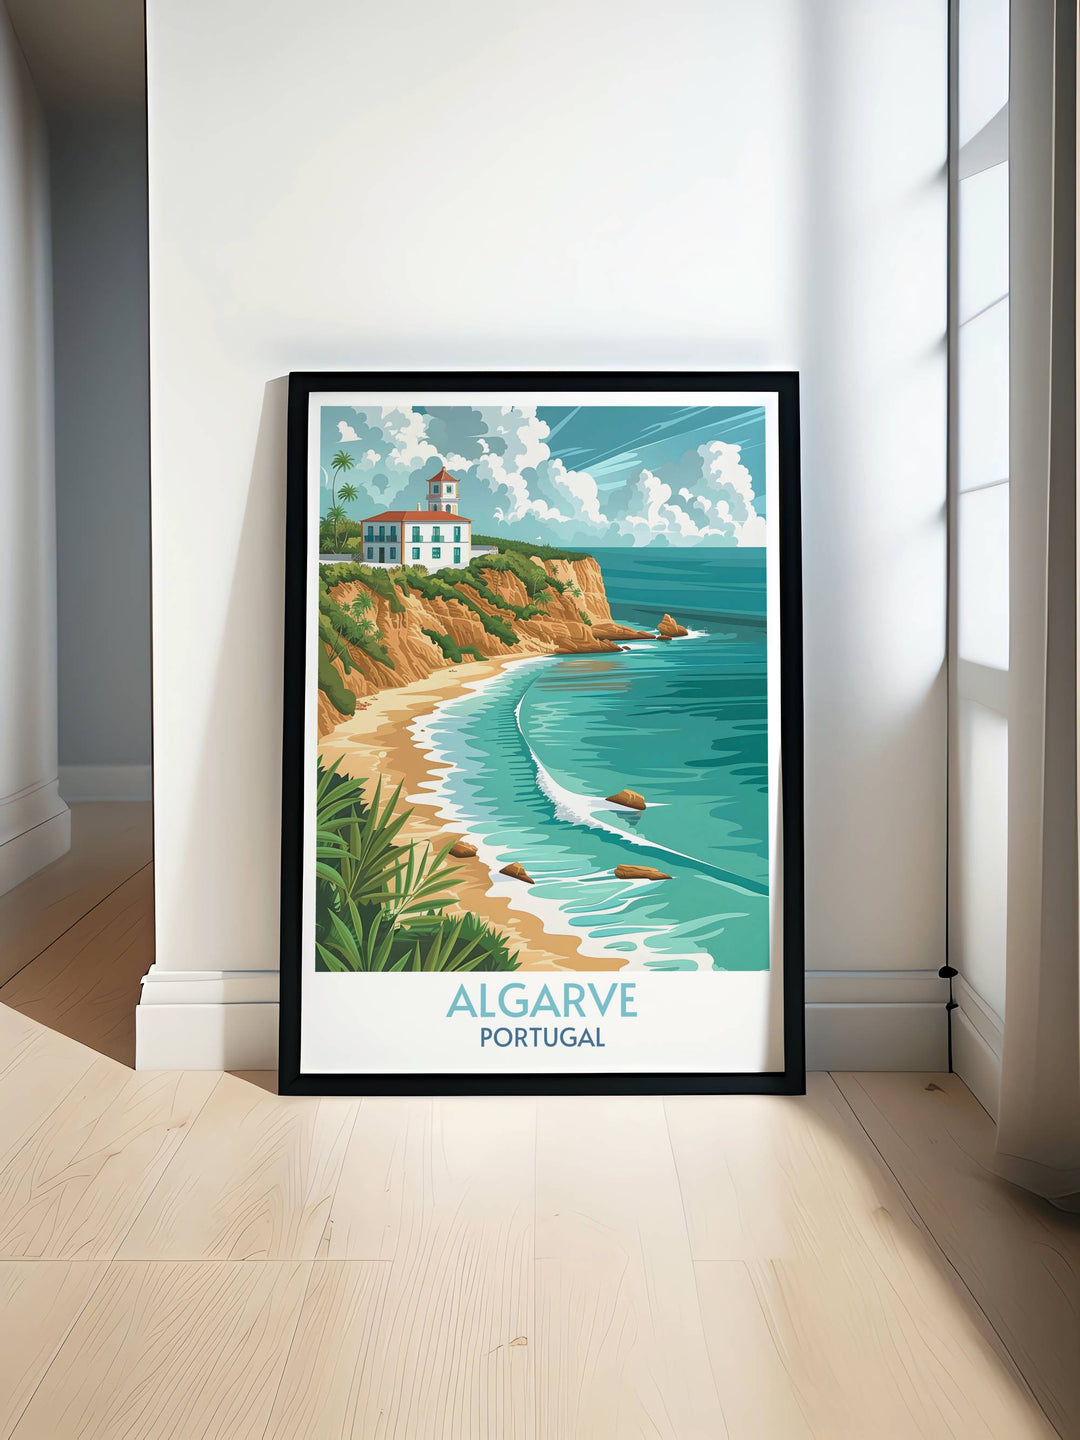 Algarve Beaches print showcasing golden sands and crystal clear waters perfect for home decor or a thoughtful gift. This elegant wall art brings the beauty of the Algarve coastline into your living space.